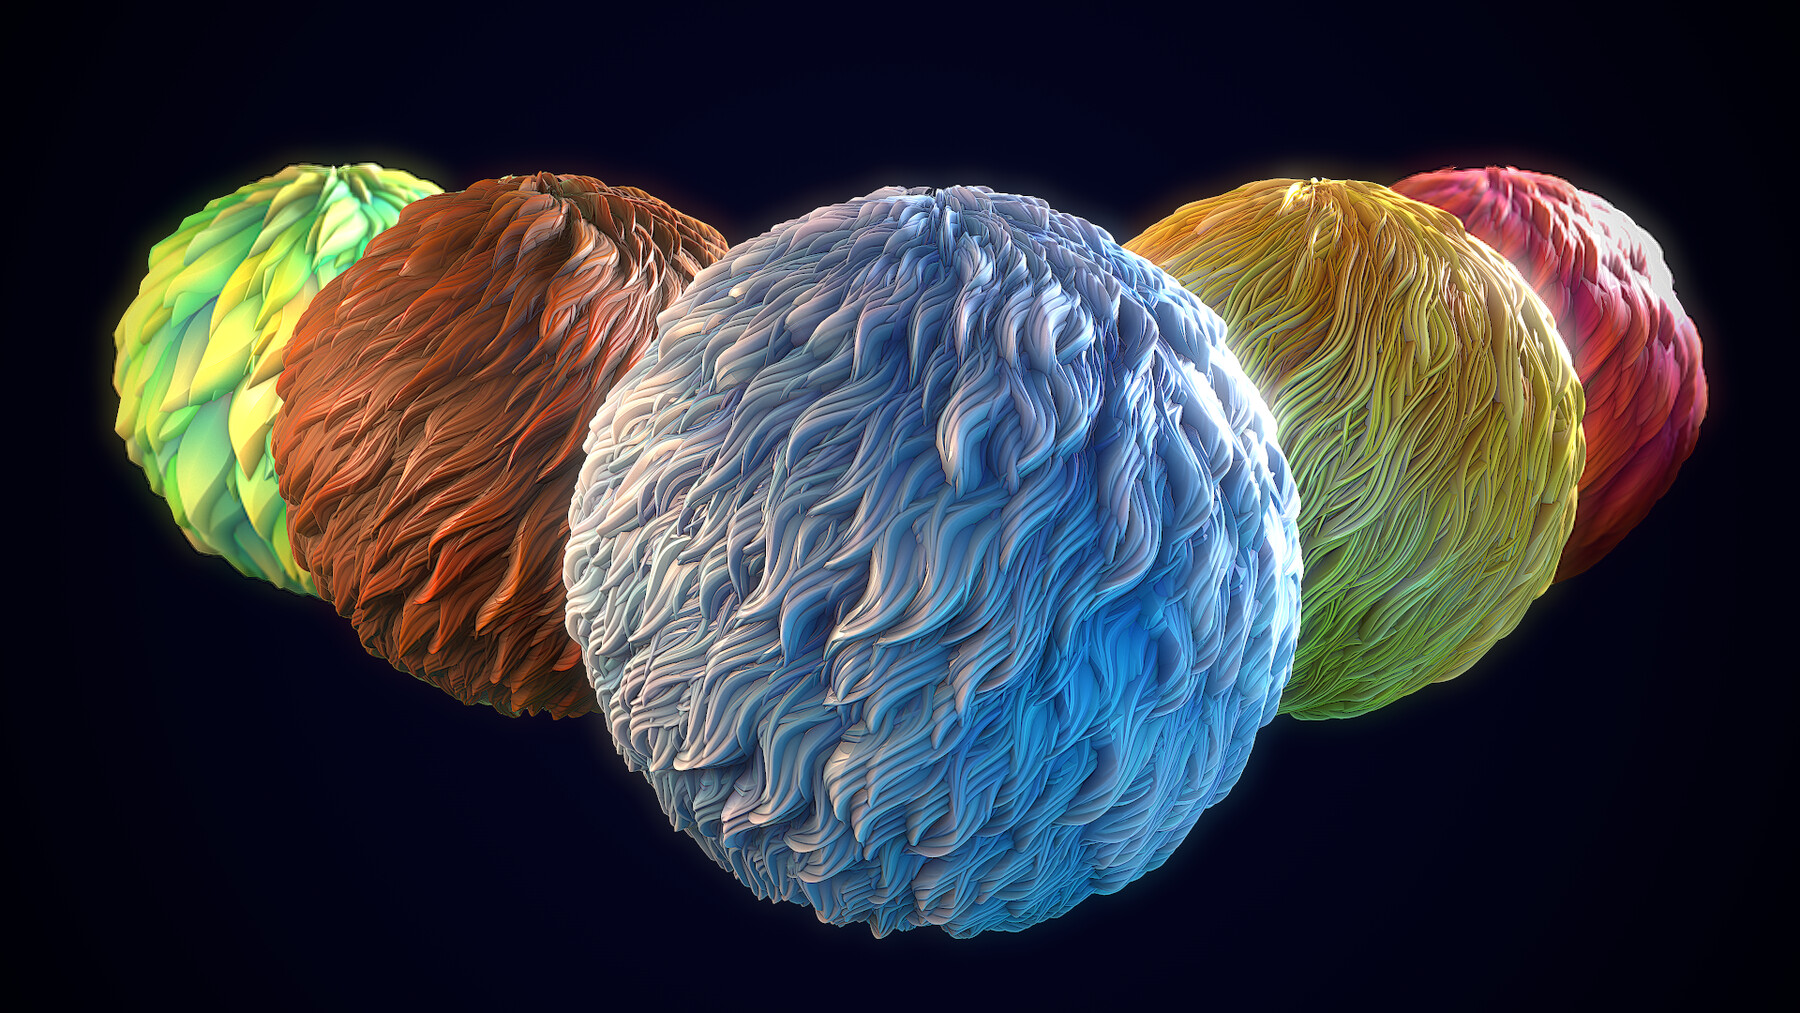 Colorful spheres showing the fur asset